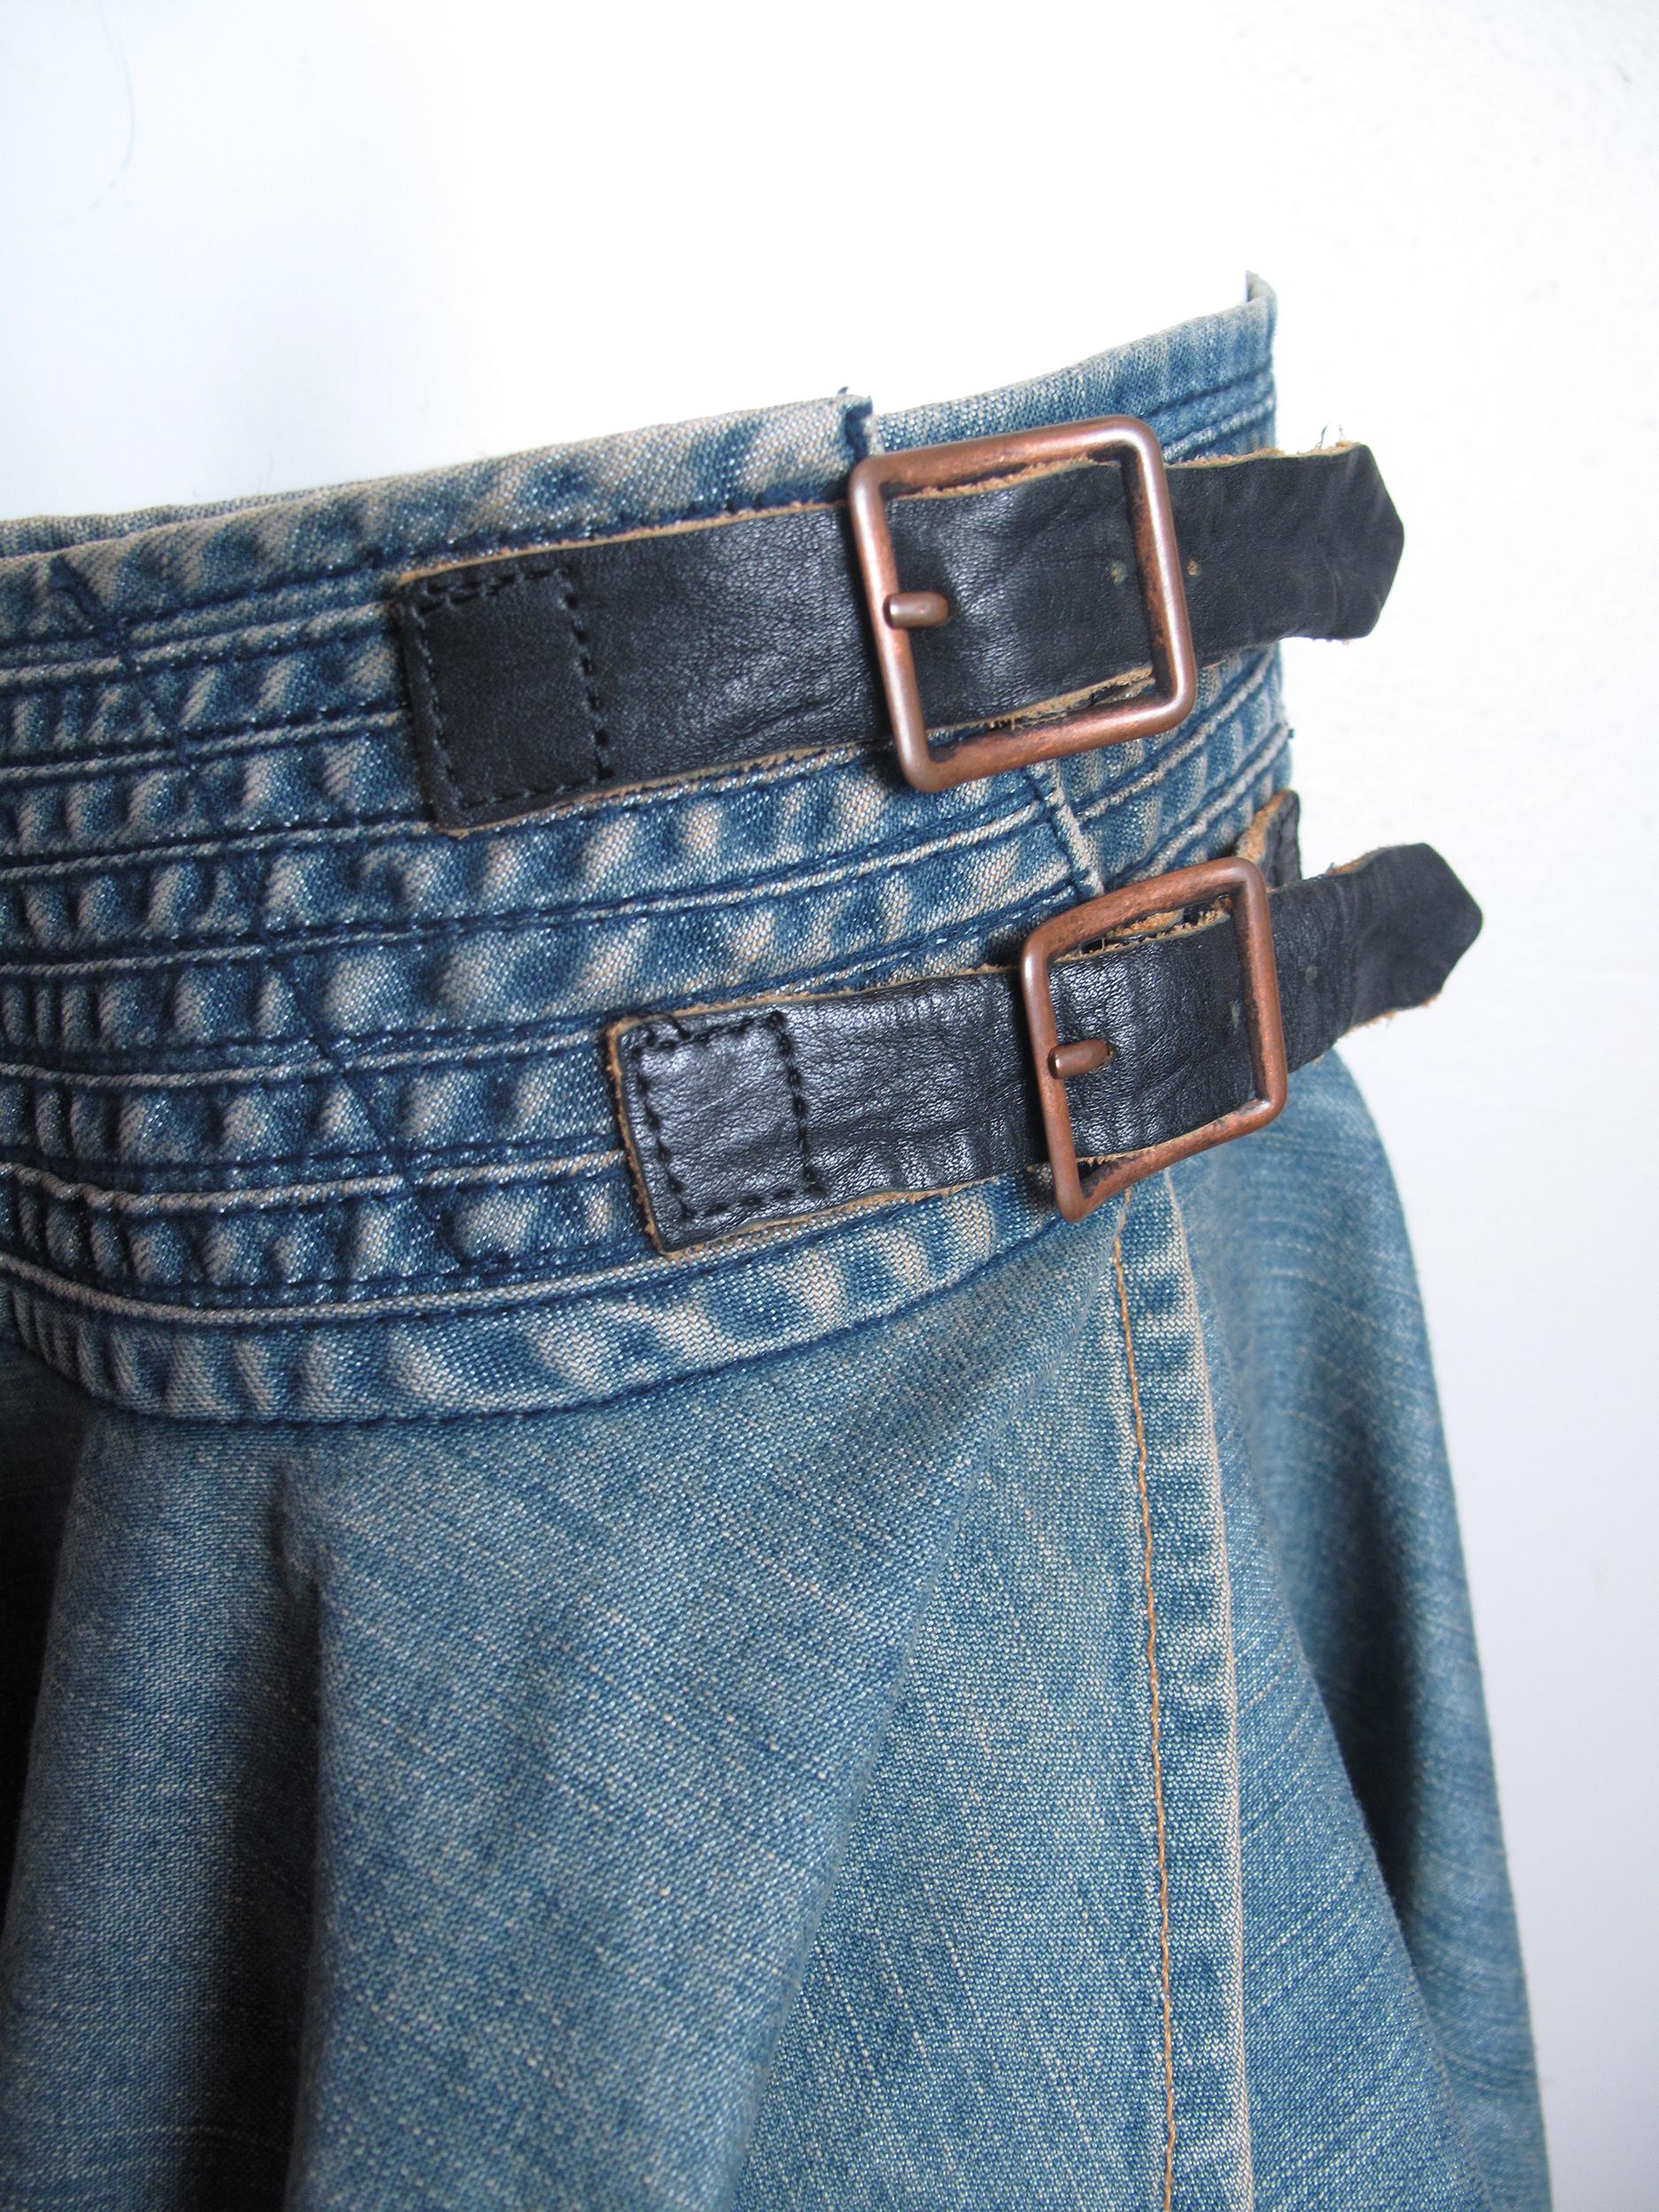 Junya Watanabe MAN denim skirt with side buckles, 2004.  Condition: Excellent. Size M
